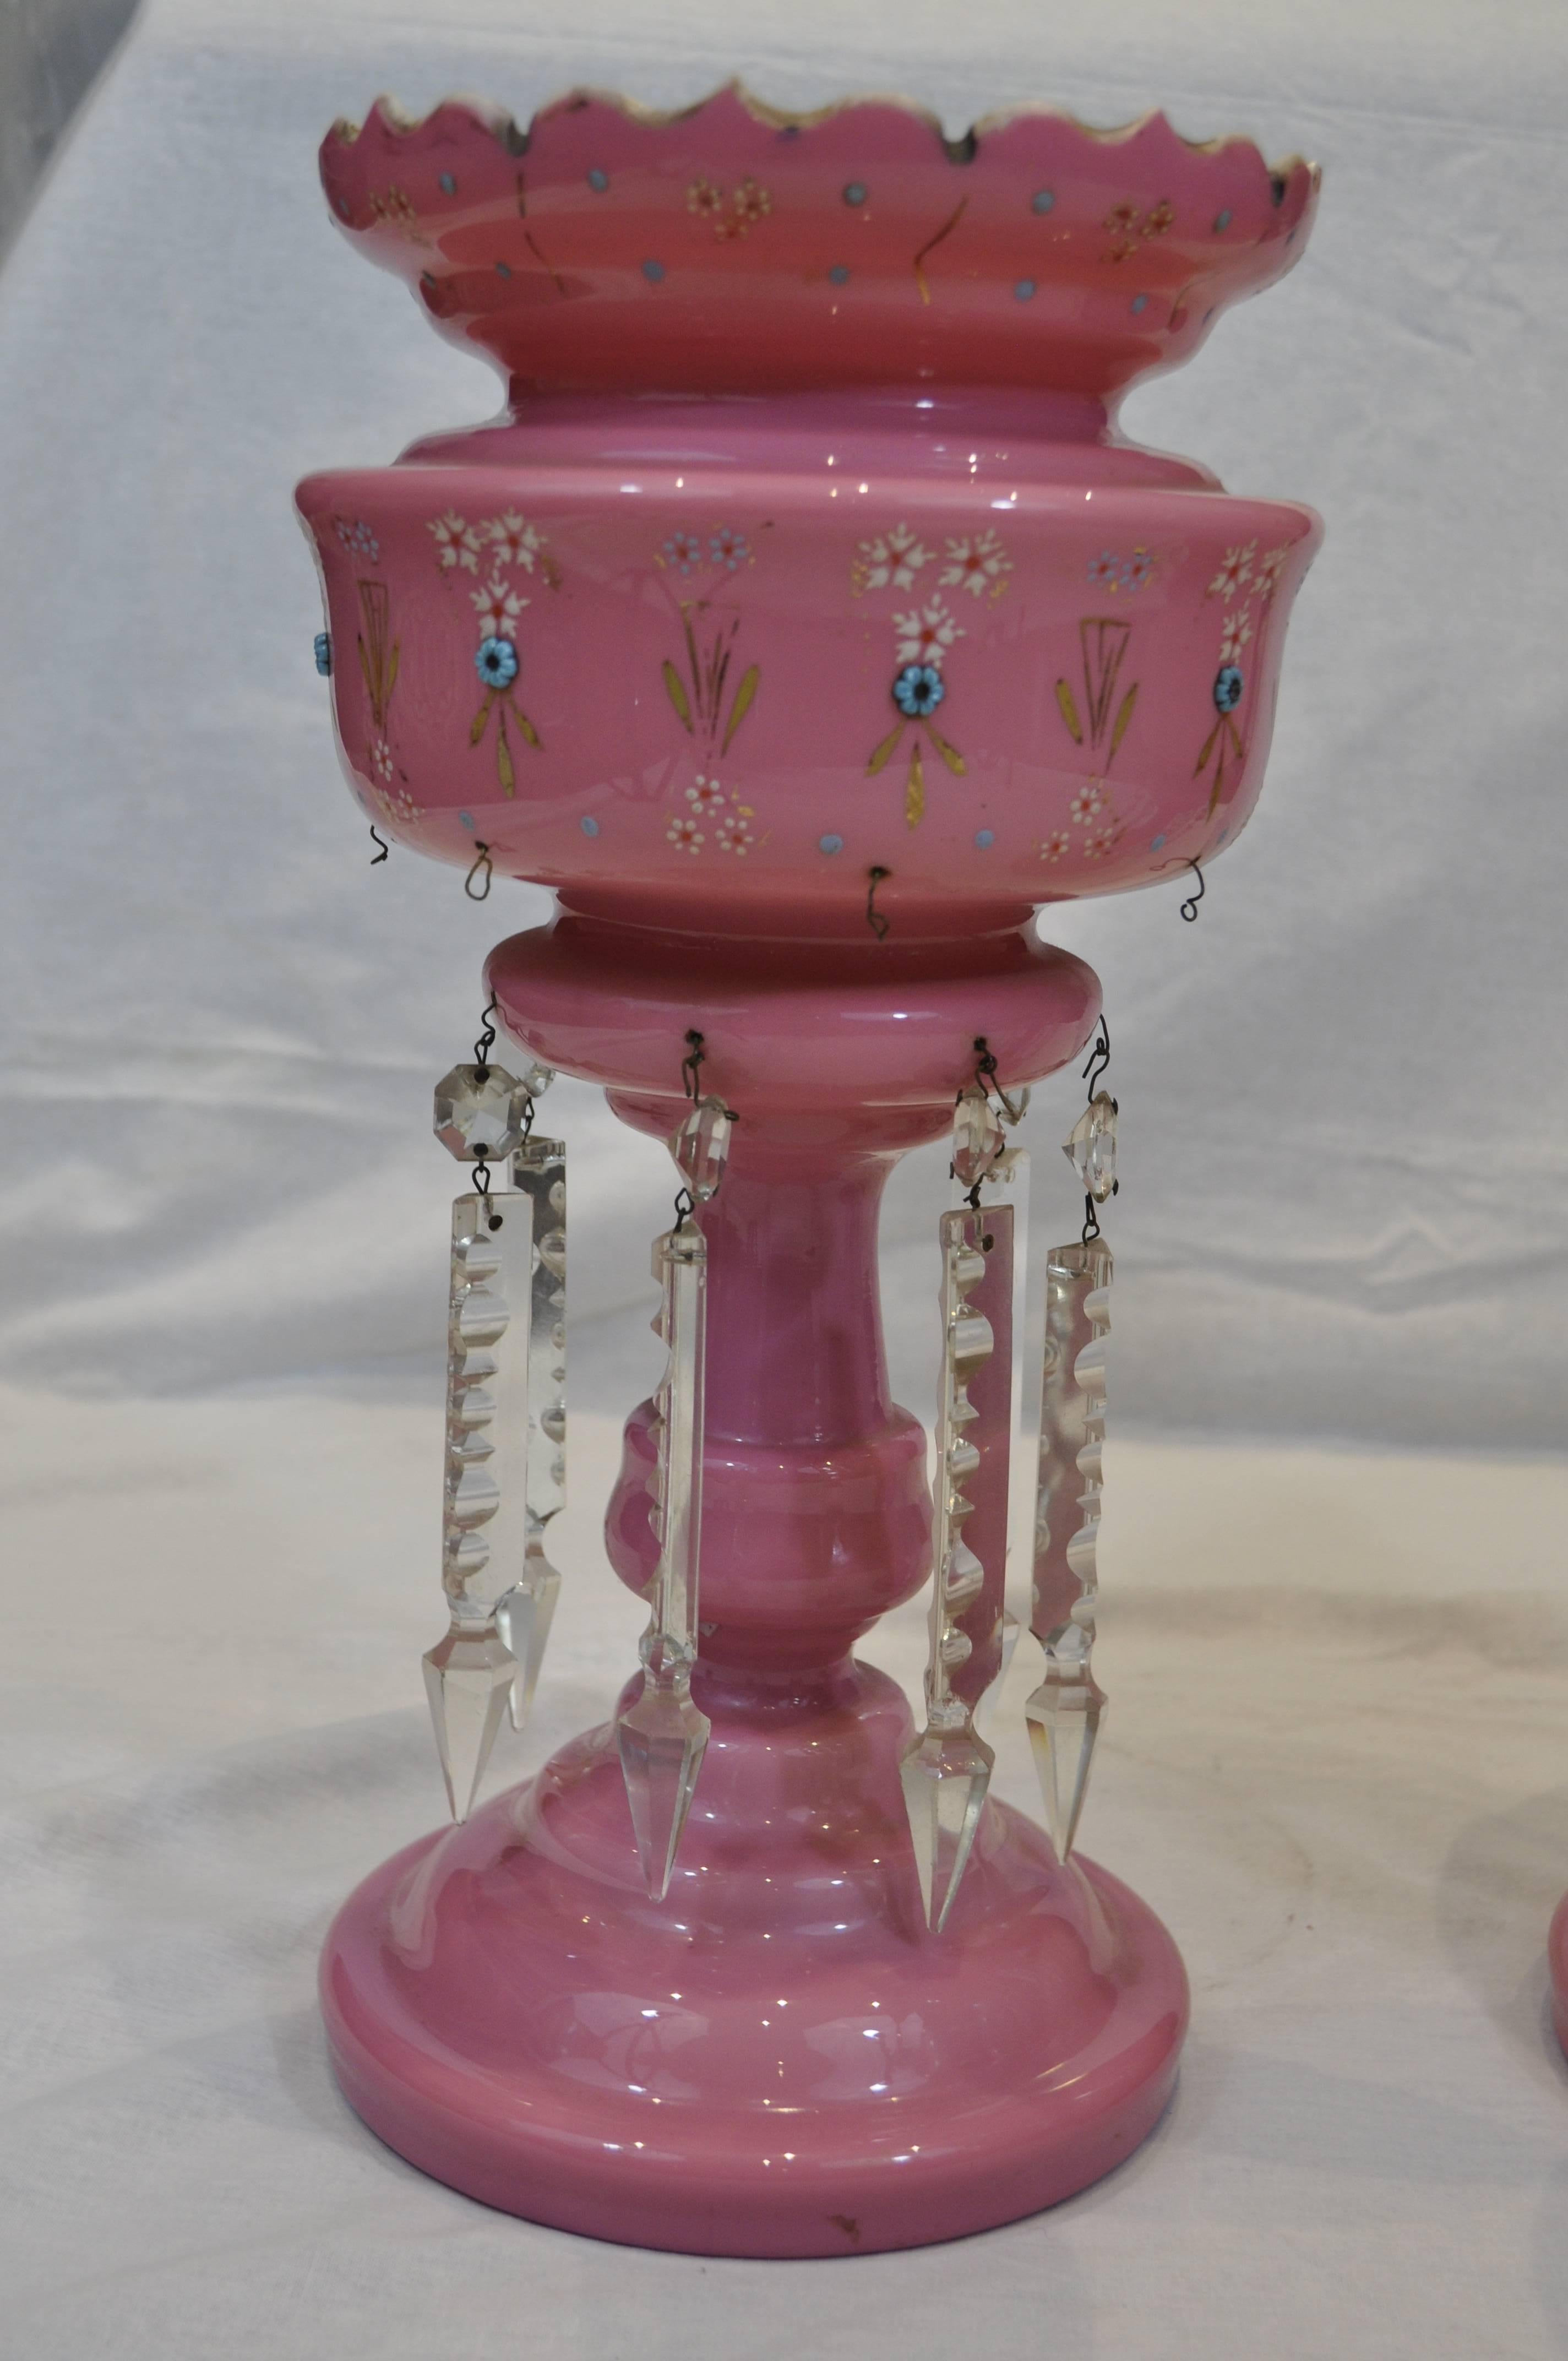 A pair of pink Bohemian opaline glass mantel lustres in the shape of a large cup with a scalloped rim with a round stand and base. They are decorated with white flower enameled designs and feature small blue glass ‘jewels’ that form further floral